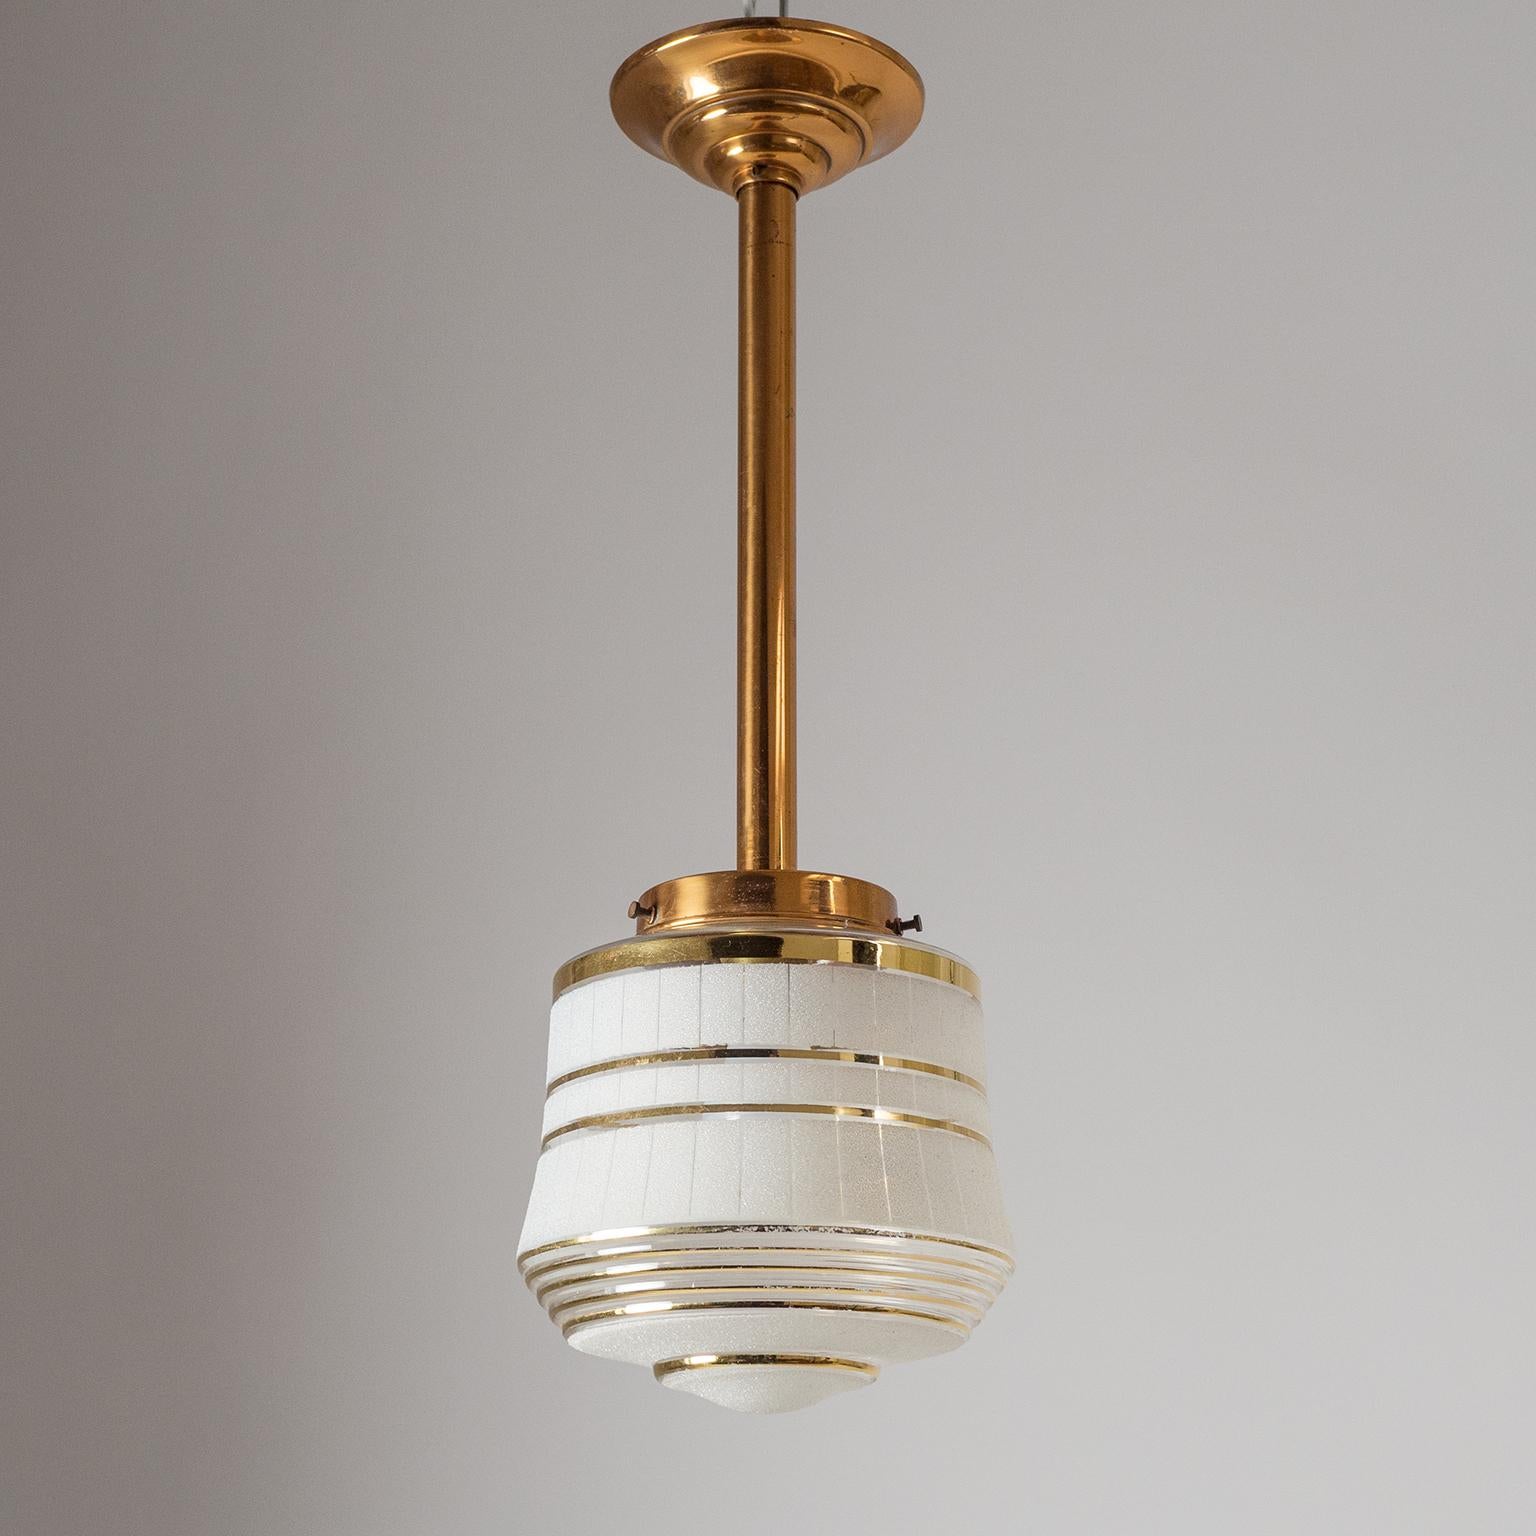 Lovely French Art Deco ceiling light from the late 1940s. Rare all copper hardware with a tiered, clear glass diffuser which is partially frosted and has several gold rims emphasizing the tiered shape of the glass. Very nice original condition with